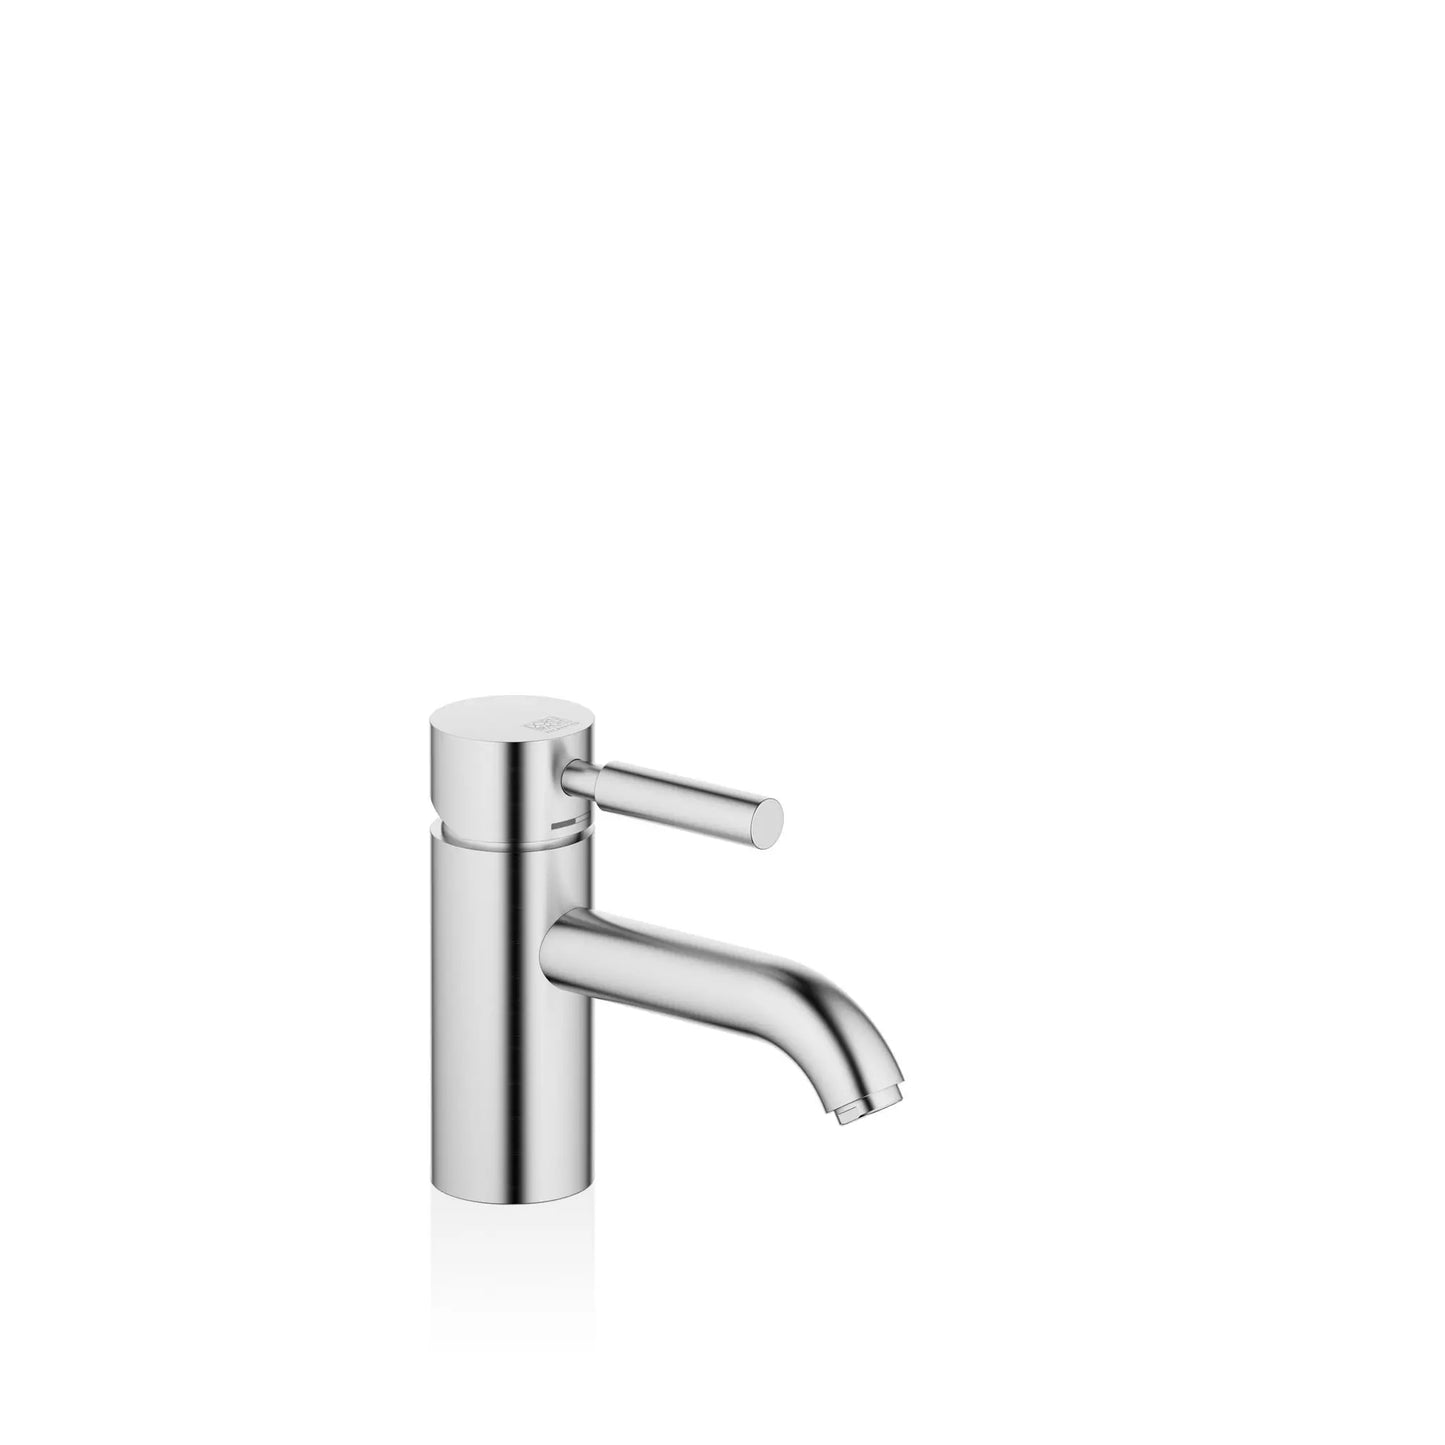 EDITION PRO Single-lever basin mixer without pop-up waste 